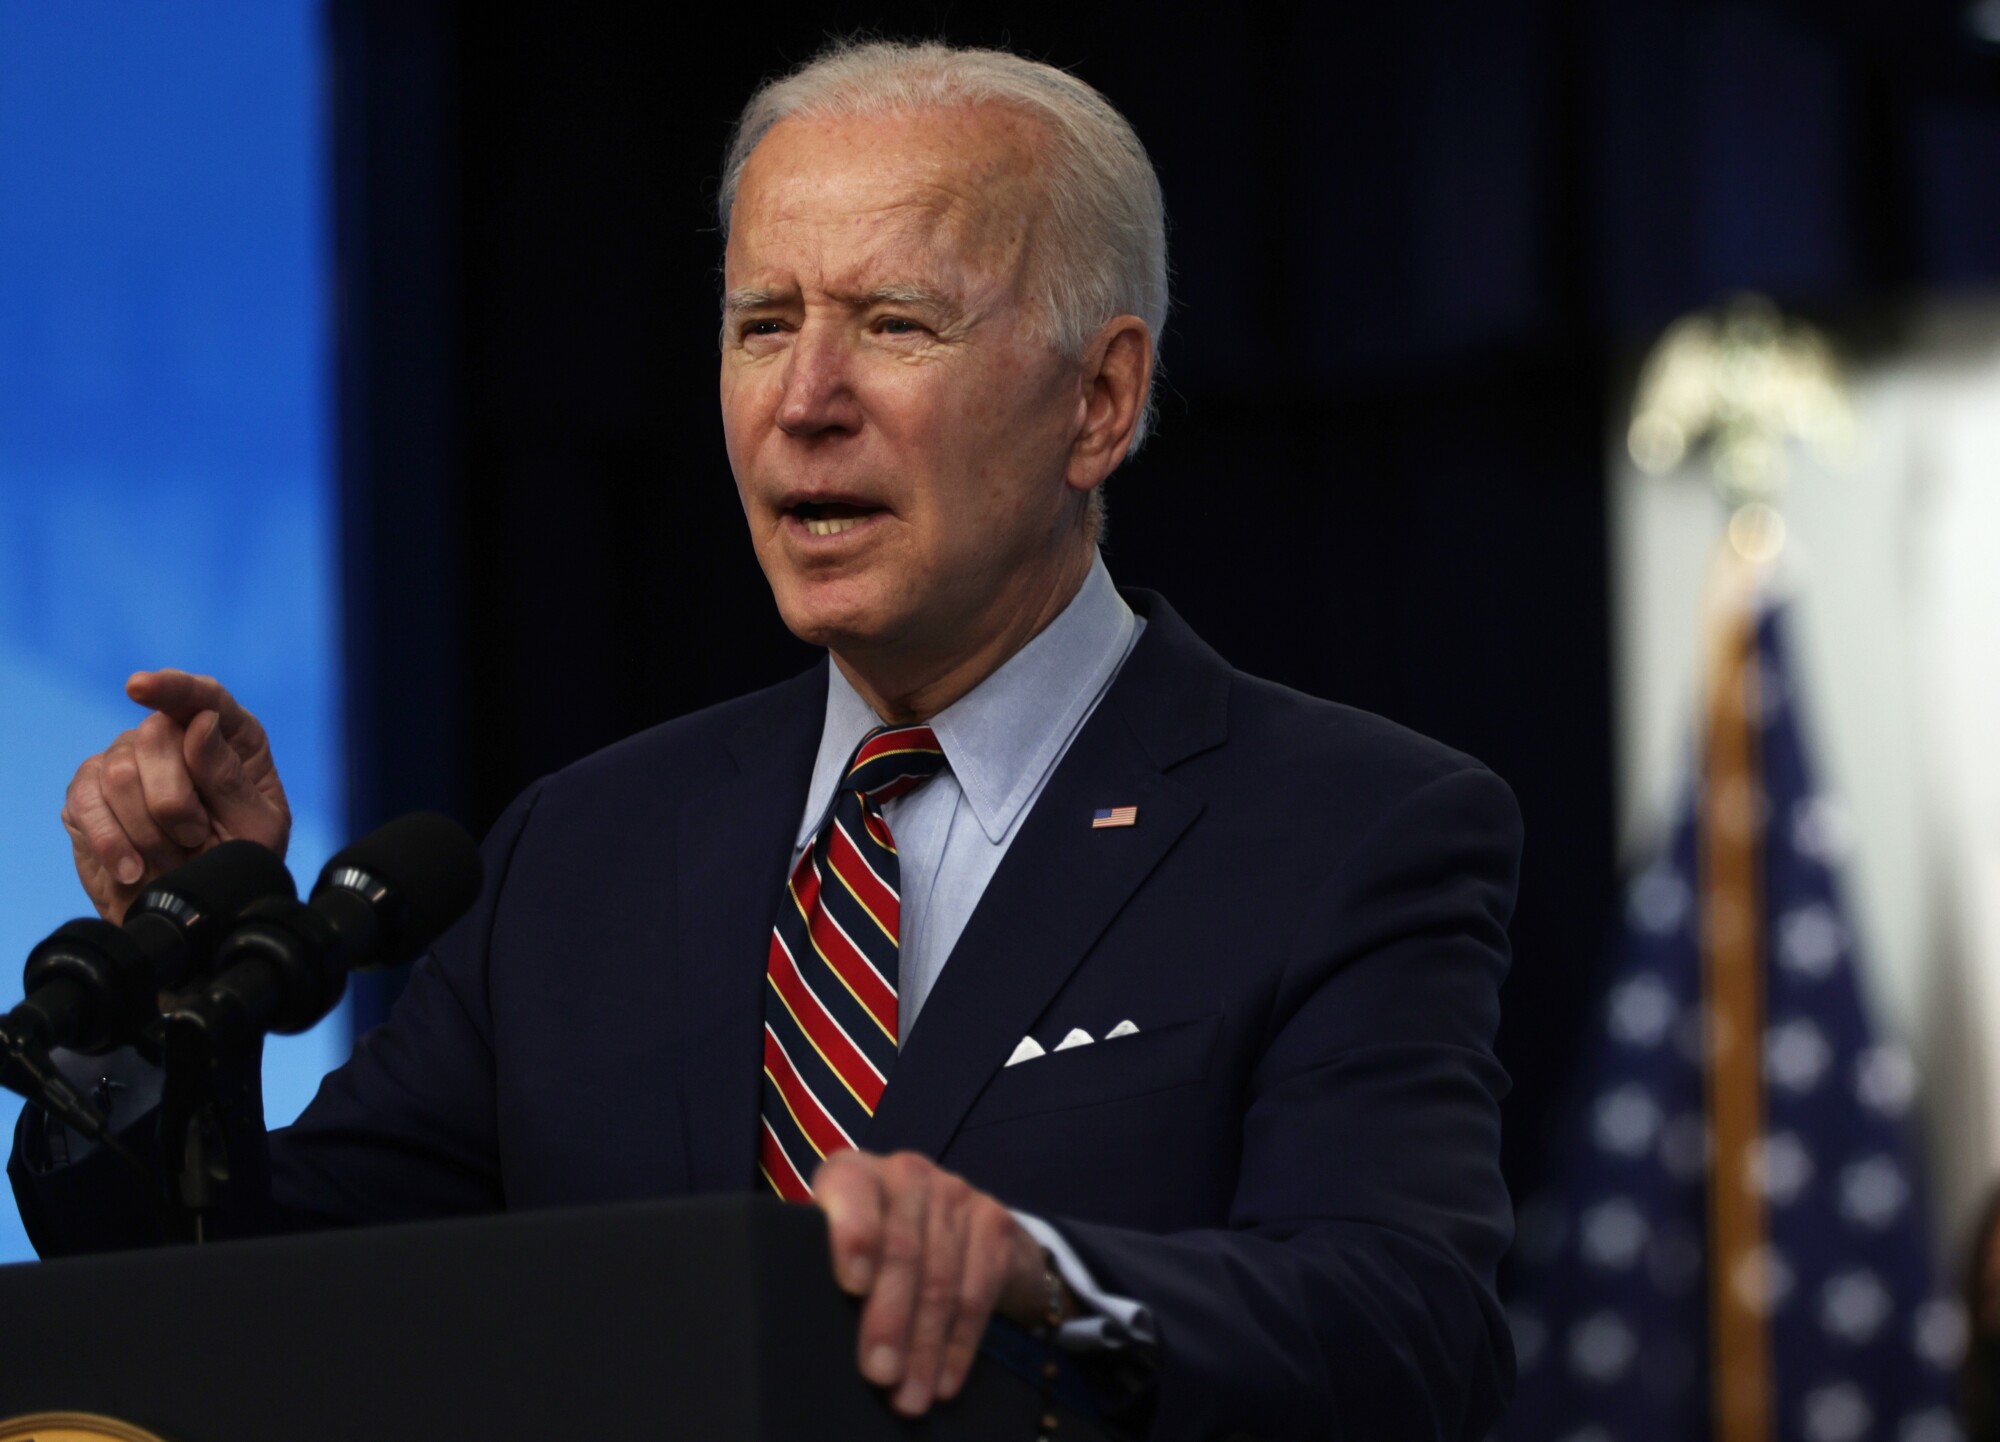 Biden Pushes Employers to Provide Paid Time Off for COVID-19 Vaccinations